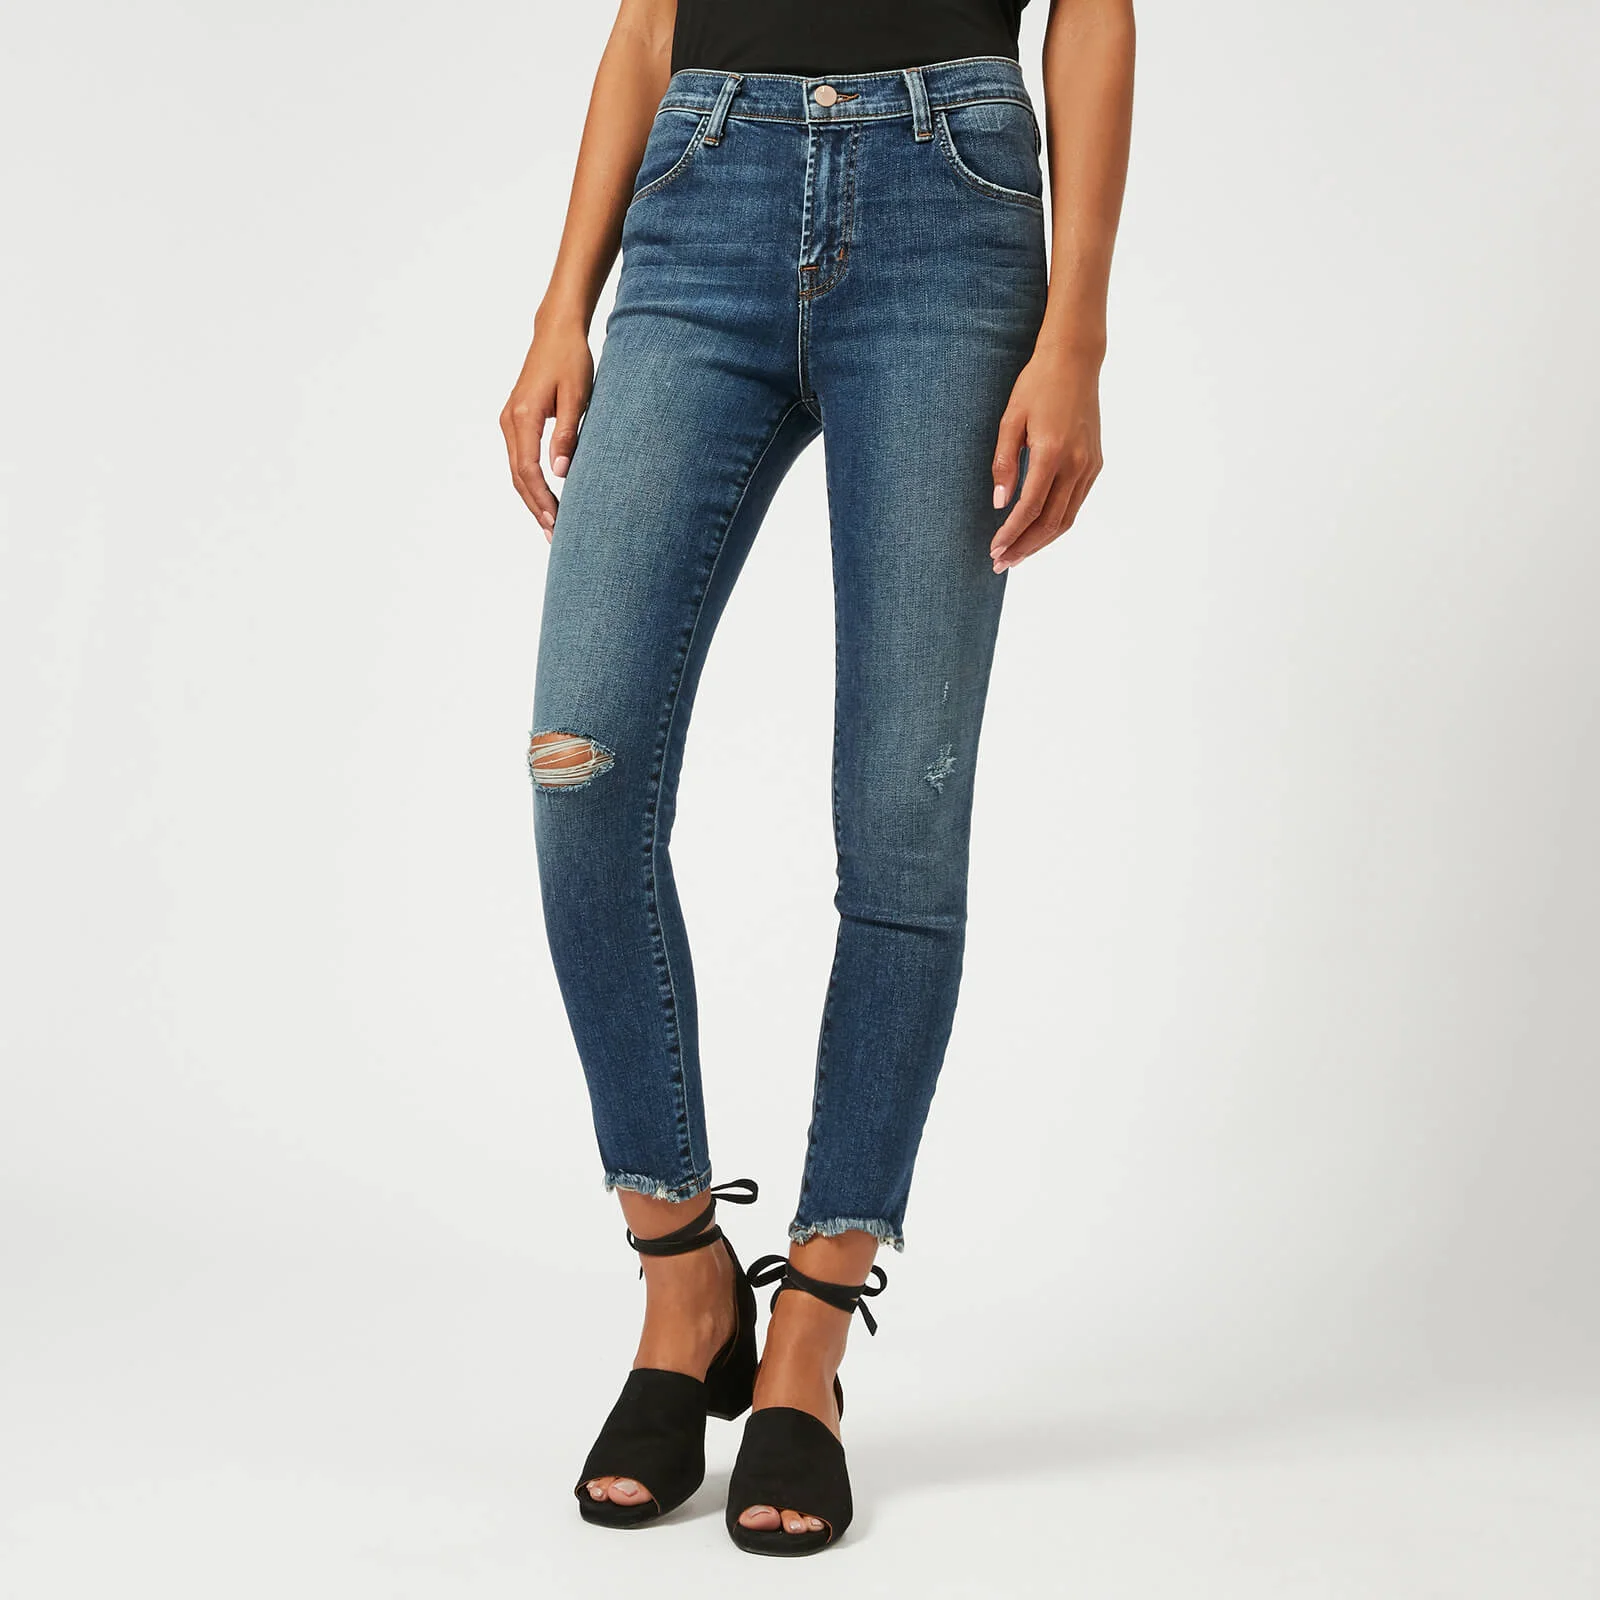 J Brand Women's Alana High Rise Skinny Cropped Jeans with Distress - Persuade Image 1